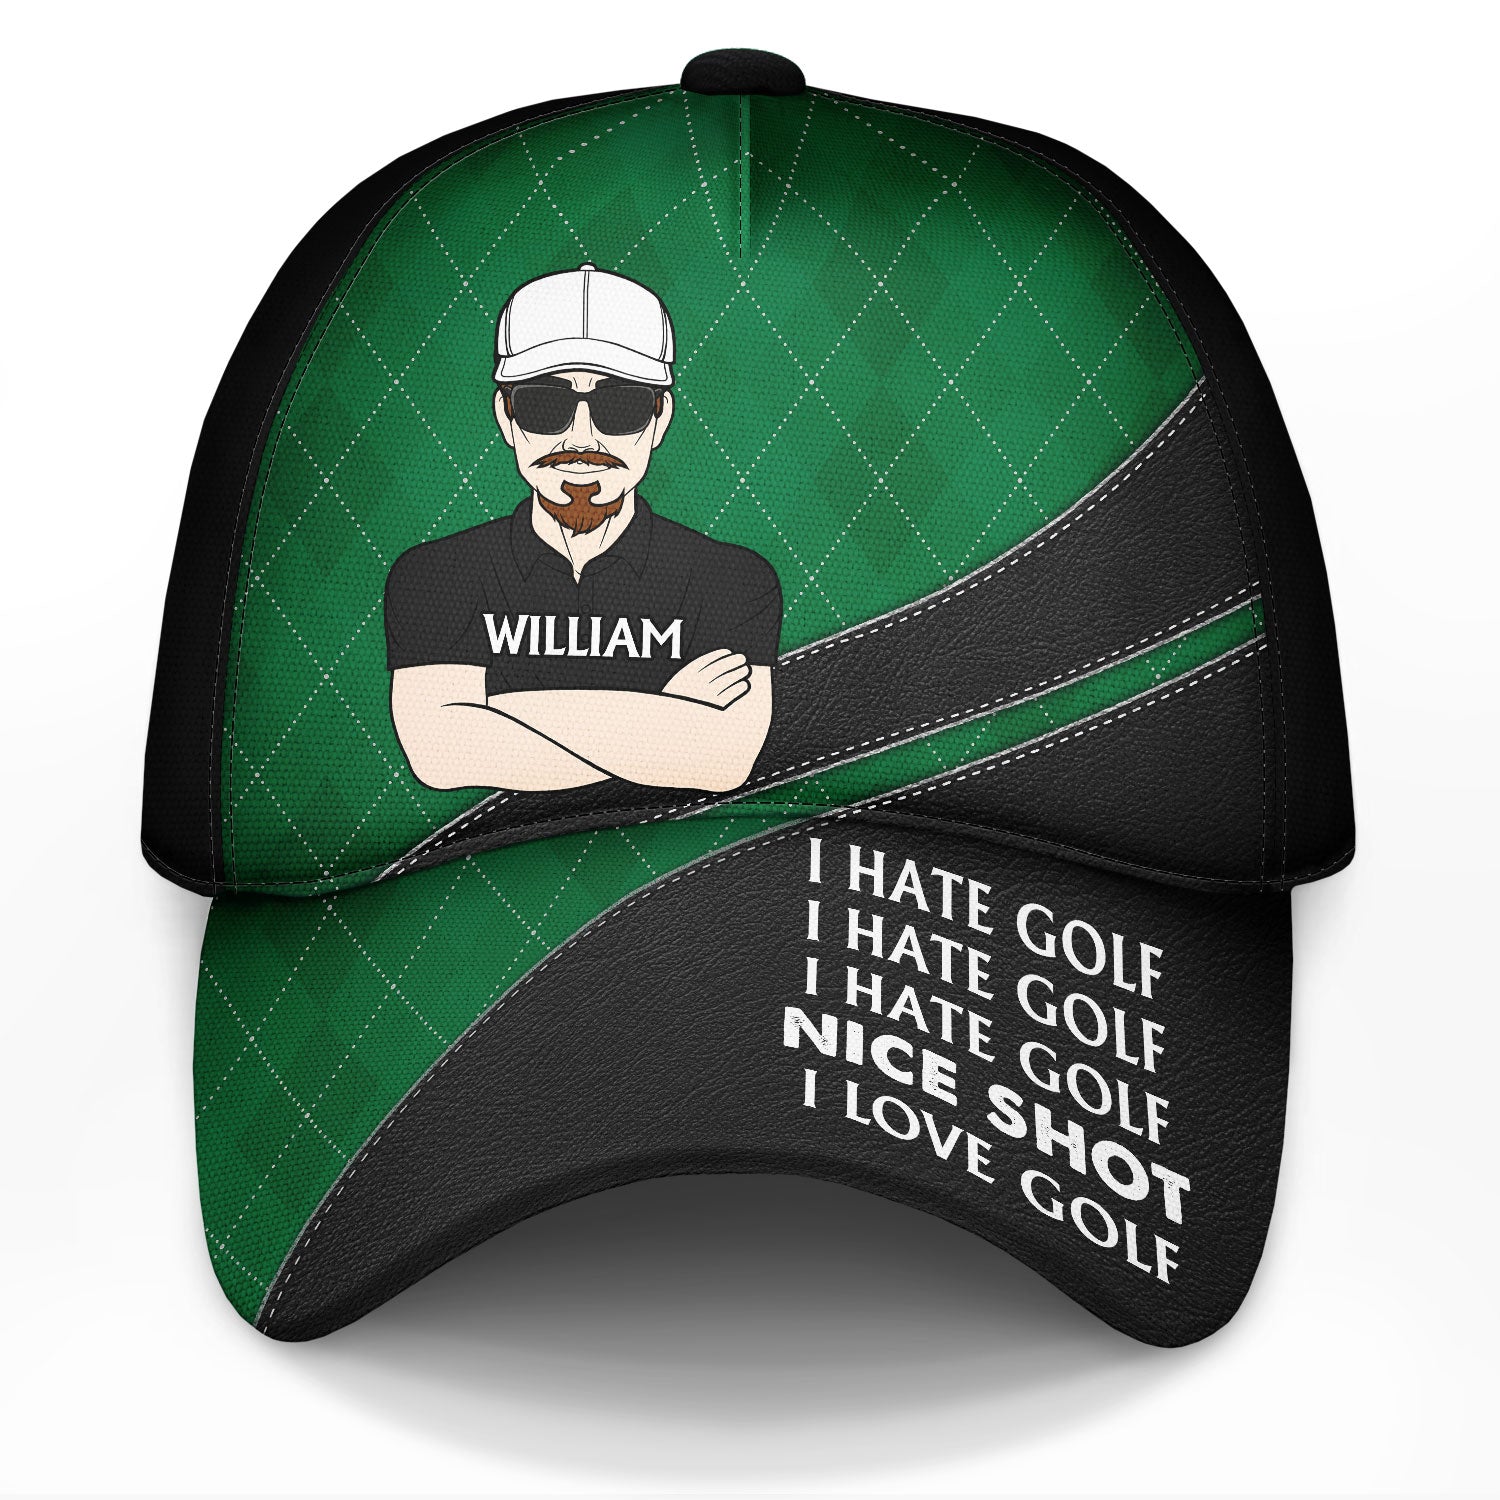 Nice Shot I Love Golf - Gift For Dad, Father, Grandpa, Golfer, Golf Lover - Personalized Classic Cap